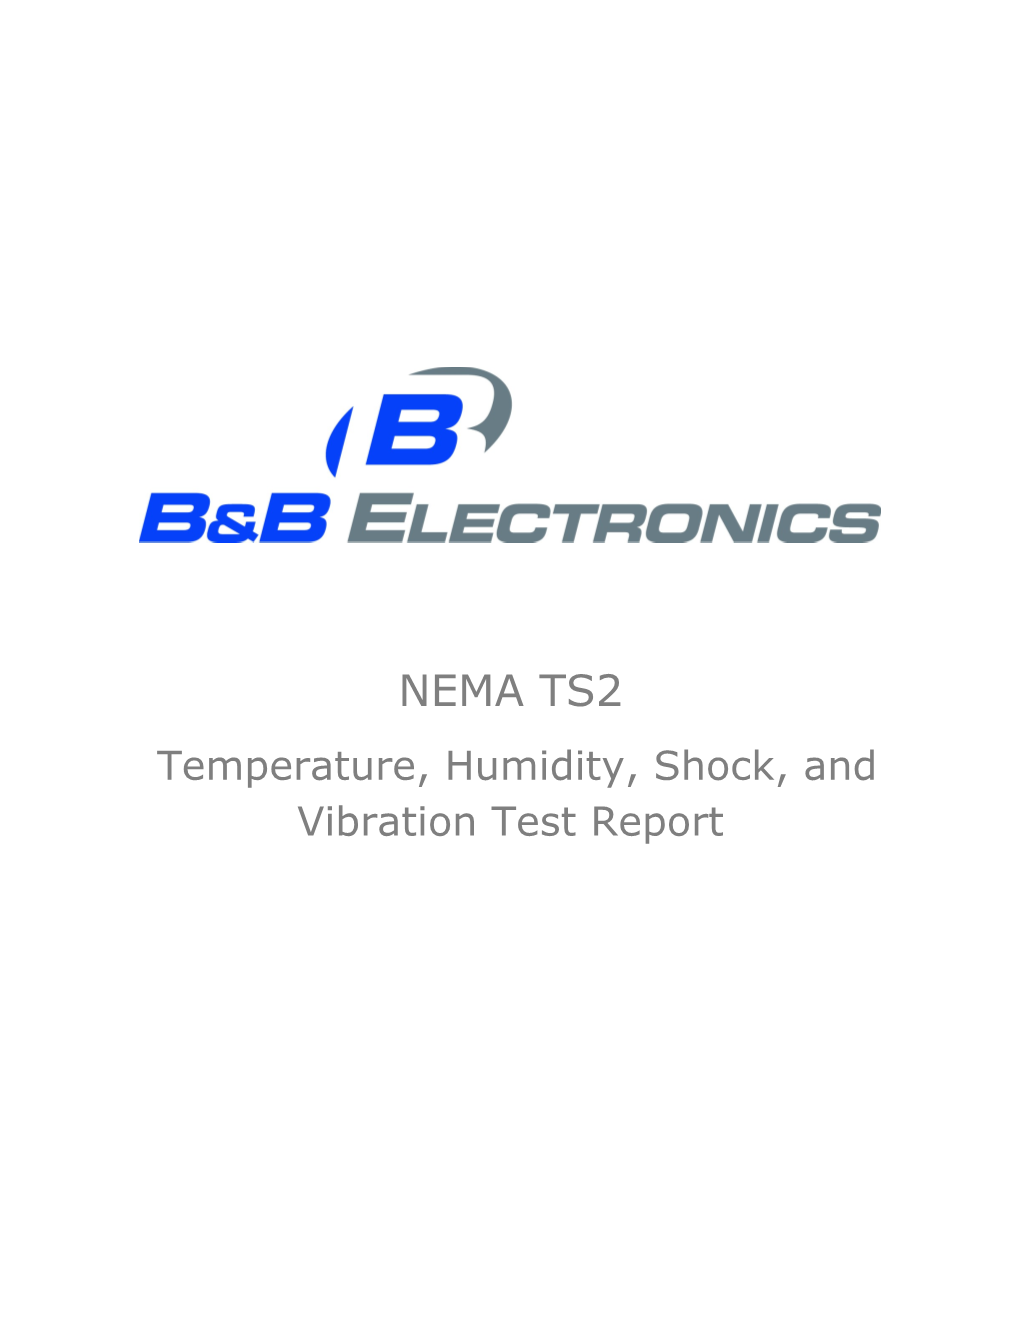 Temperature, Humidity, Shock, and Vibration Test Report